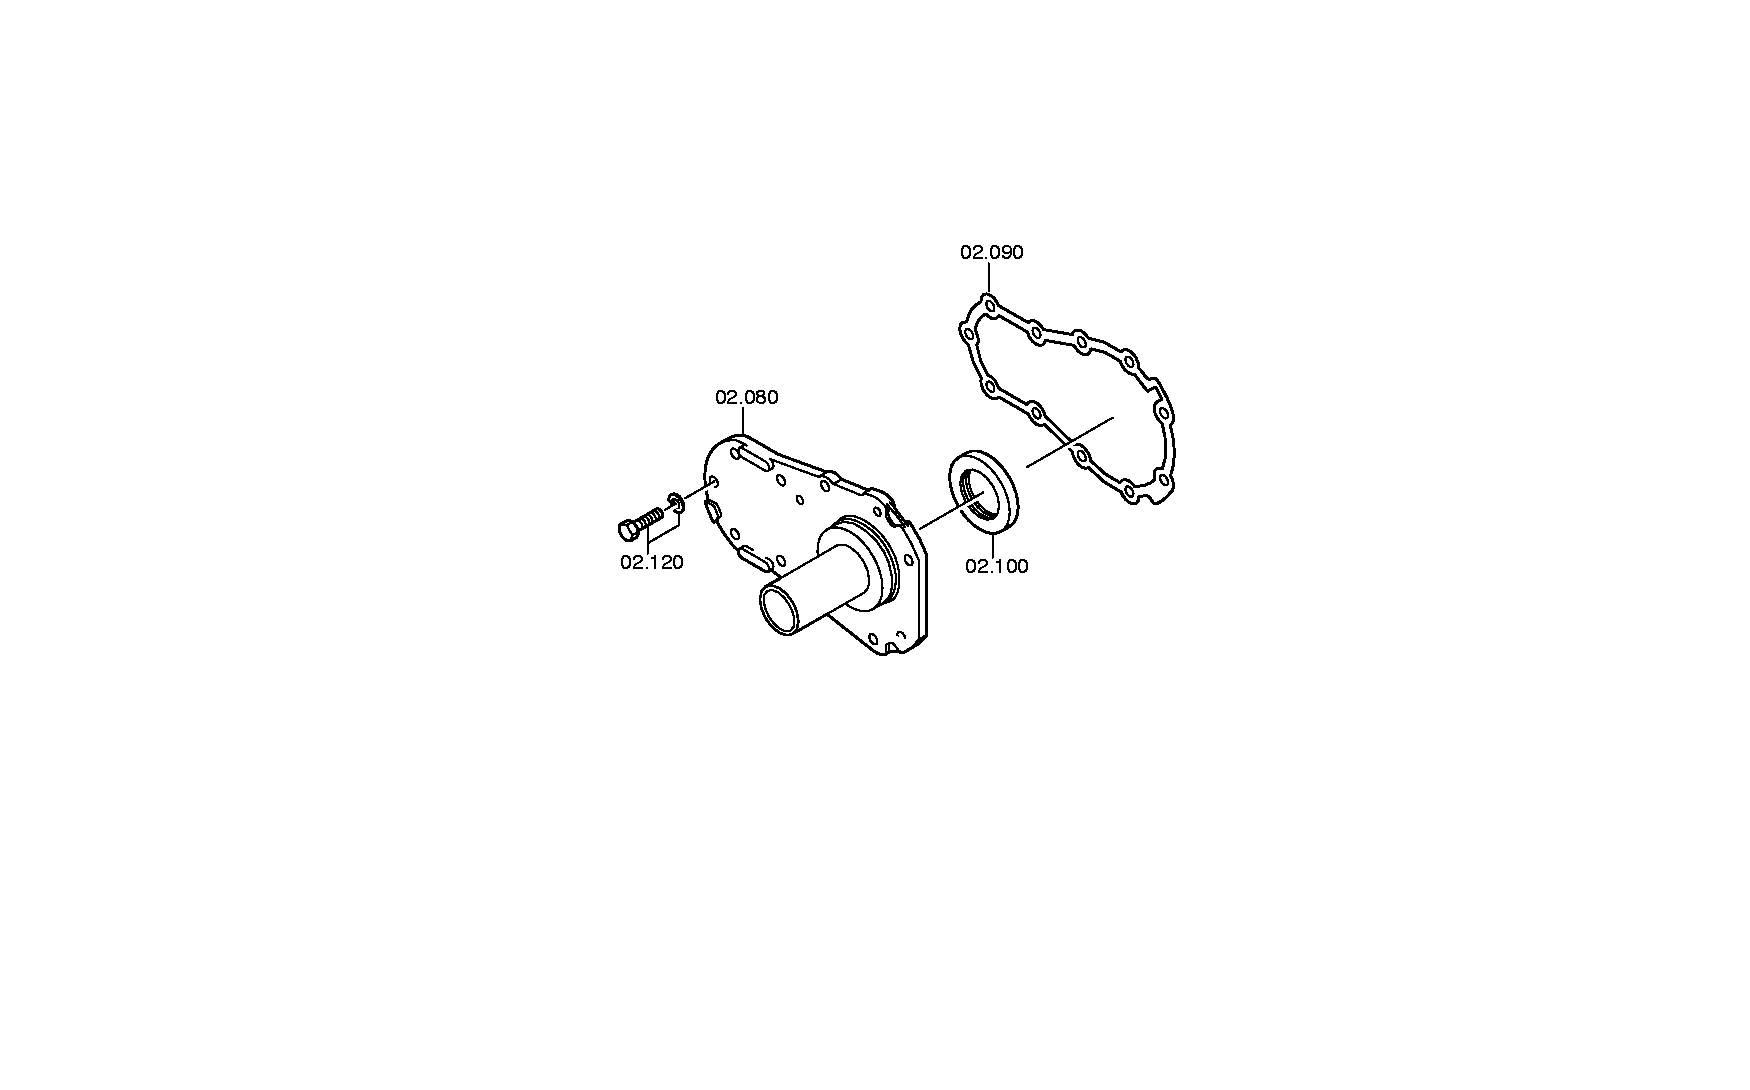 drawing for Astra Veicoli Industriali 114446 - SHAFT SEAL (figure 1)